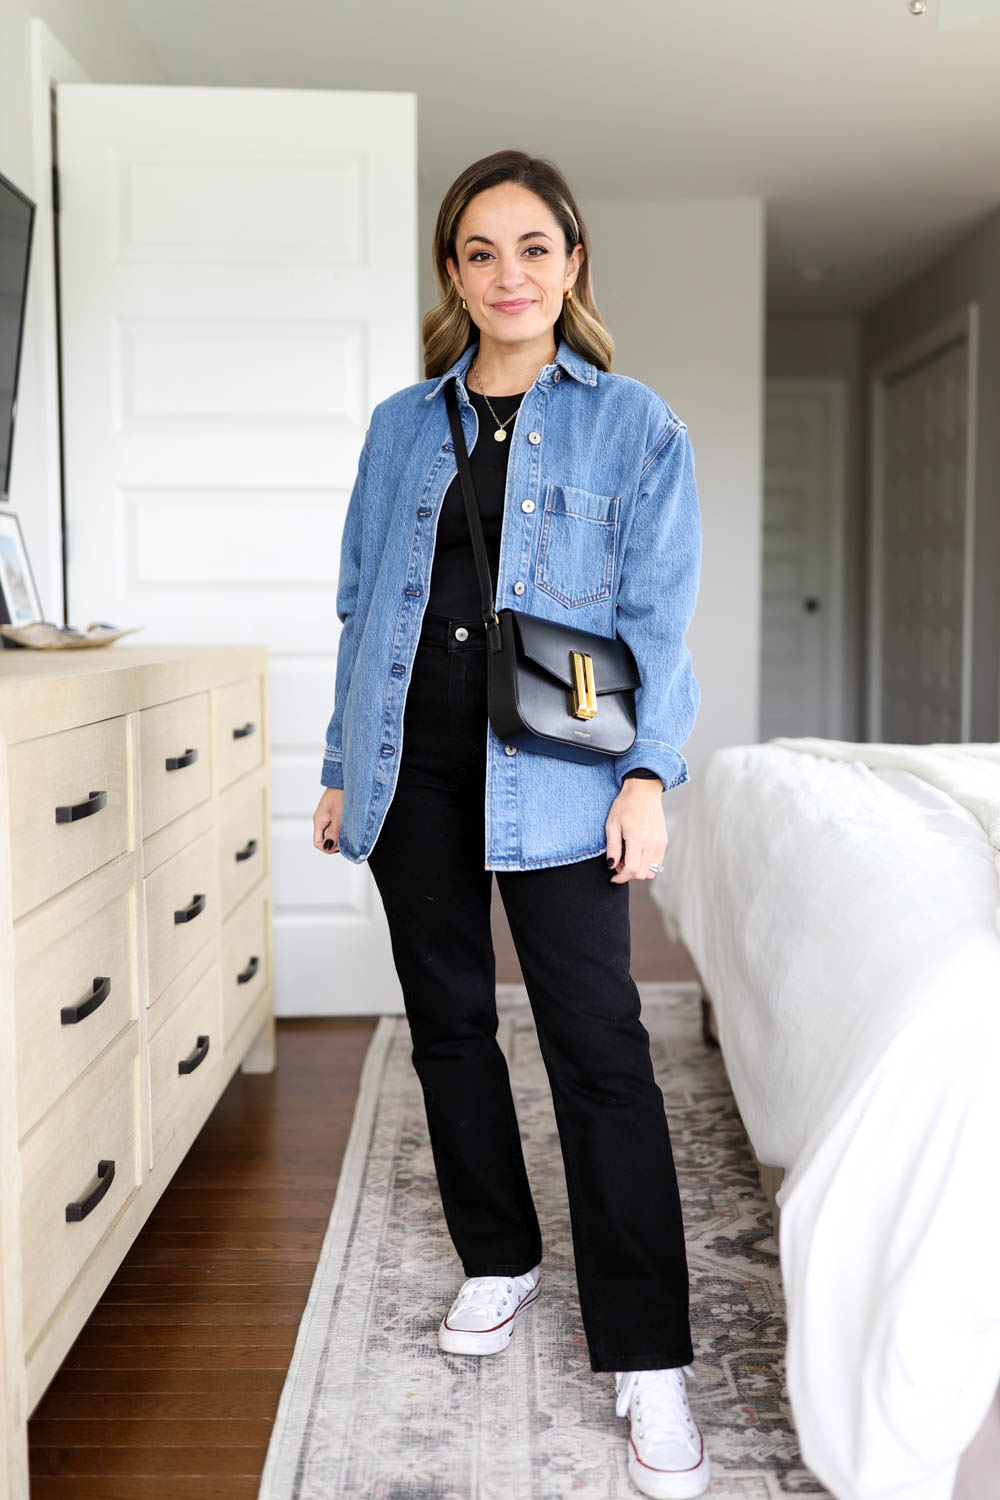 Outfits ideas with black jeans | six ways to wear black jeans | petite style 